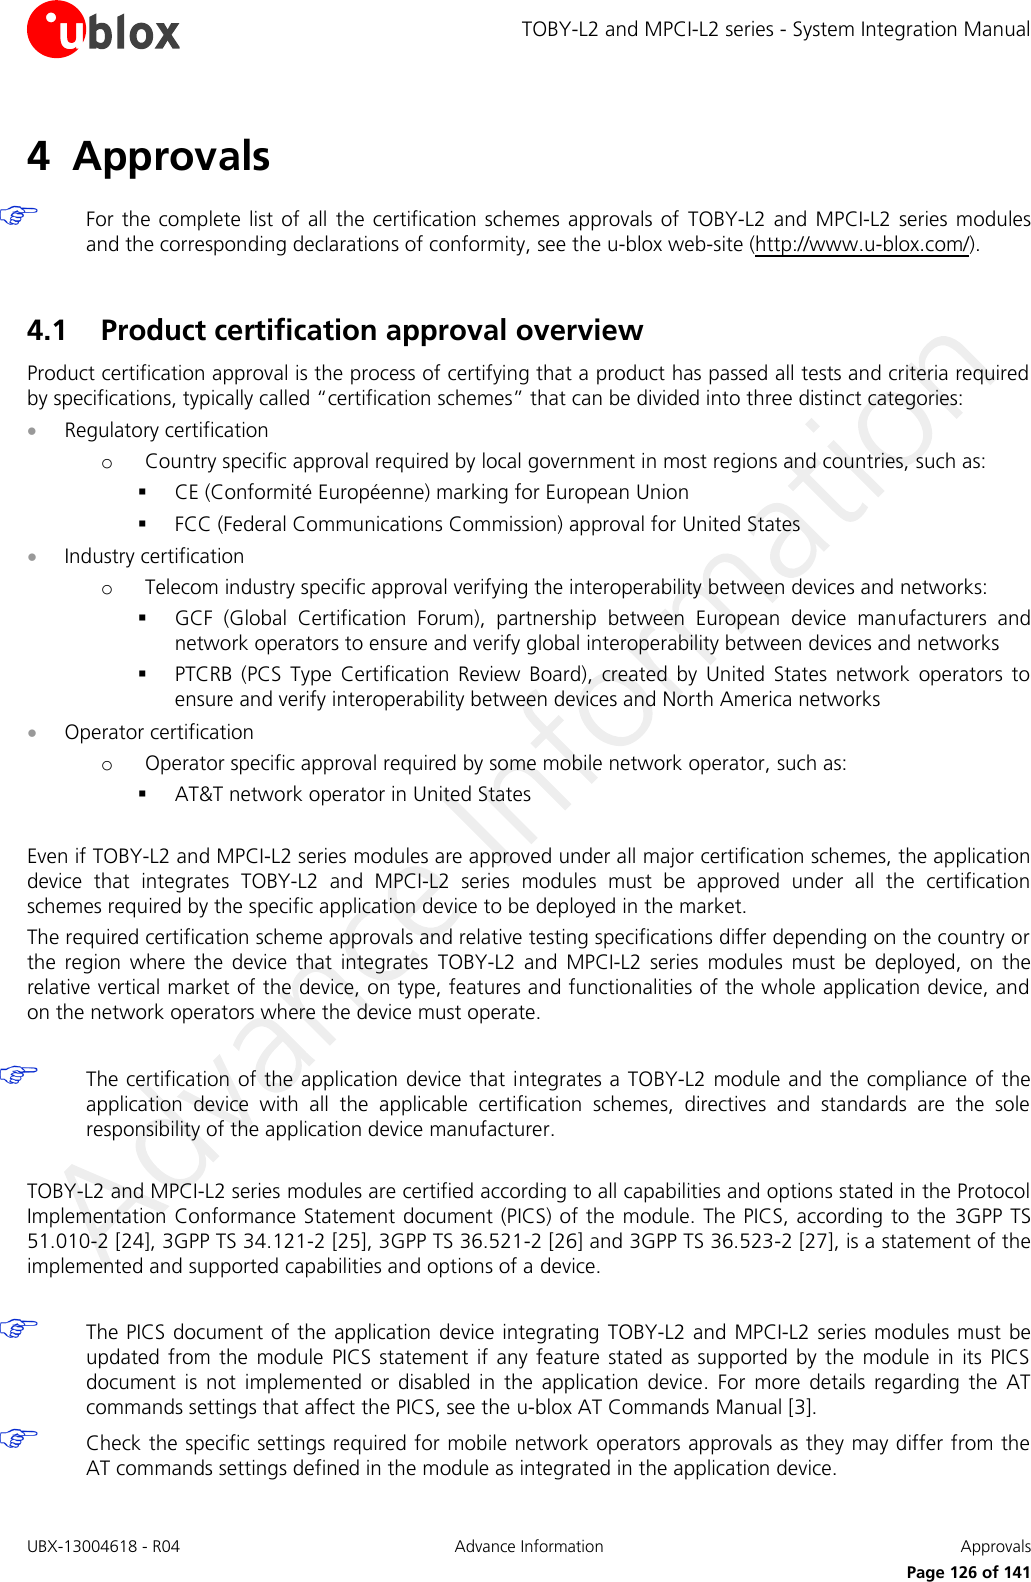 TOBY-L2 and MPCI-L2 series - System Integration Manual UBX-13004618 - R04  Advance Information  Approvals     Page 126 of 141 4 Approvals   For the complete  list of  all  the  certification schemes approvals  of  TOBY-L2 and  MPCI-L2 series  modules and the corresponding declarations of conformity, see the u-blox web-site (http://www.u-blox.com/).  4.1 Product certification approval overview Product certification approval is the process of certifying that a product has passed all tests and criteria required by specifications, typically called “certification schemes” that can be divided into three distinct categories:  Regulatory certification o Country specific approval required by local government in most regions and countries, such as:  CE (Conformité Européenne) marking for European Union  FCC (Federal Communications Commission) approval for United States  Industry certification o Telecom industry specific approval verifying the interoperability between devices and networks:  GCF  (Global  Certification  Forum),  partnership  between  European  device  manufacturers  and network operators to ensure and verify global interoperability between devices and networks  PTCRB  (PCS  Type  Certification  Review  Board),  created  by  United  States  network  operators  to ensure and verify interoperability between devices and North America networks  Operator certification o Operator specific approval required by some mobile network operator, such as:  AT&amp;T network operator in United States  Even if TOBY-L2 and MPCI-L2 series modules are approved under all major certification schemes, the application device  that  integrates  TOBY-L2  and  MPCI-L2  series  modules  must  be  approved  under  all  the  certification schemes required by the specific application device to be deployed in the market. The required certification scheme approvals and relative testing specifications differ depending on the country or the  region  where  the  device  that  integrates  TOBY-L2  and  MPCI-L2  series  modules  must  be  deployed,  on  the relative vertical market of the device, on type, features and functionalities of the whole application device, and on the network operators where the device must operate.   The certification of the application device that integrates a TOBY-L2  module and the compliance of the application  device  with  all  the  applicable  certification  schemes,  directives  and  standards  are  the  sole responsibility of the application device manufacturer.  TOBY-L2 and MPCI-L2 series modules are certified according to all capabilities and options stated in the Protocol Implementation Conformance Statement document (PICS) of the module. The PICS, according to the  3GPP TS 51.010-2 [24], 3GPP TS 34.121-2 [25], 3GPP TS 36.521-2 [26] and 3GPP TS 36.523-2 [27], is a statement of the implemented and supported capabilities and options of a device.   The PICS document of the application device integrating  TOBY-L2 and MPCI-L2 series modules must  be updated  from  the  module  PICS  statement  if  any  feature  stated  as  supported  by  the module  in  its PICS document  is  not  implemented  or  disabled  in  the  application  device.  For  more  details  regarding  the  AT commands settings that affect the PICS, see the u-blox AT Commands Manual [3].  Check the specific settings required for mobile network operators approvals as they may differ from the AT commands settings defined in the module as integrated in the application device.  